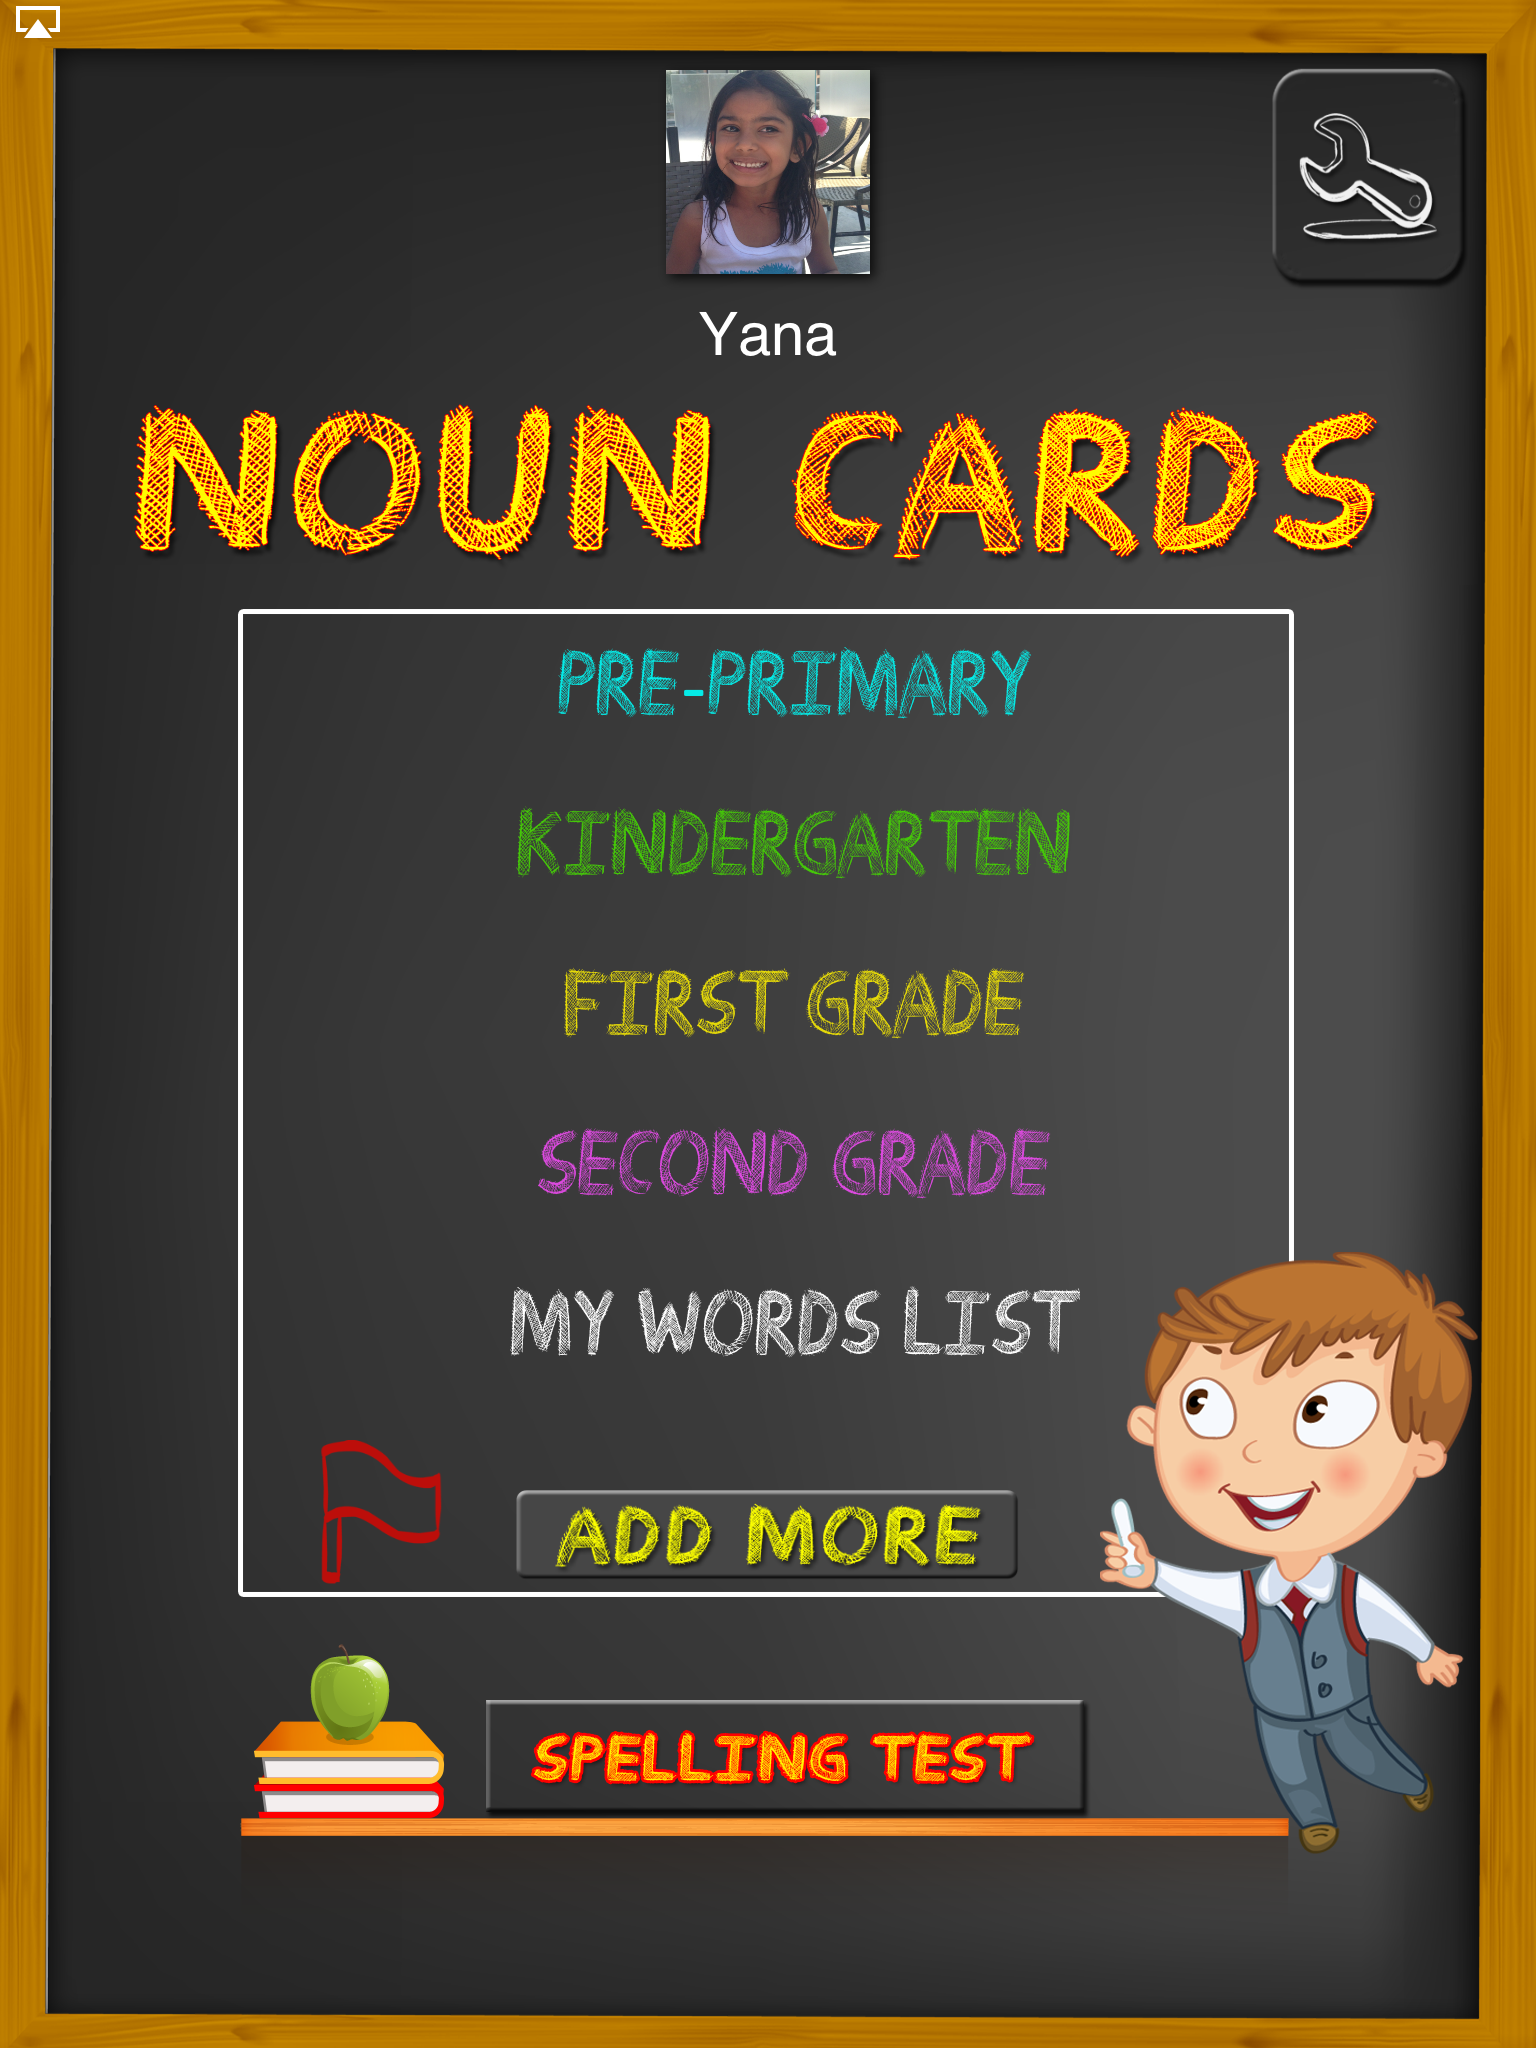 Spelling Test Practice with Nouns Screenshot